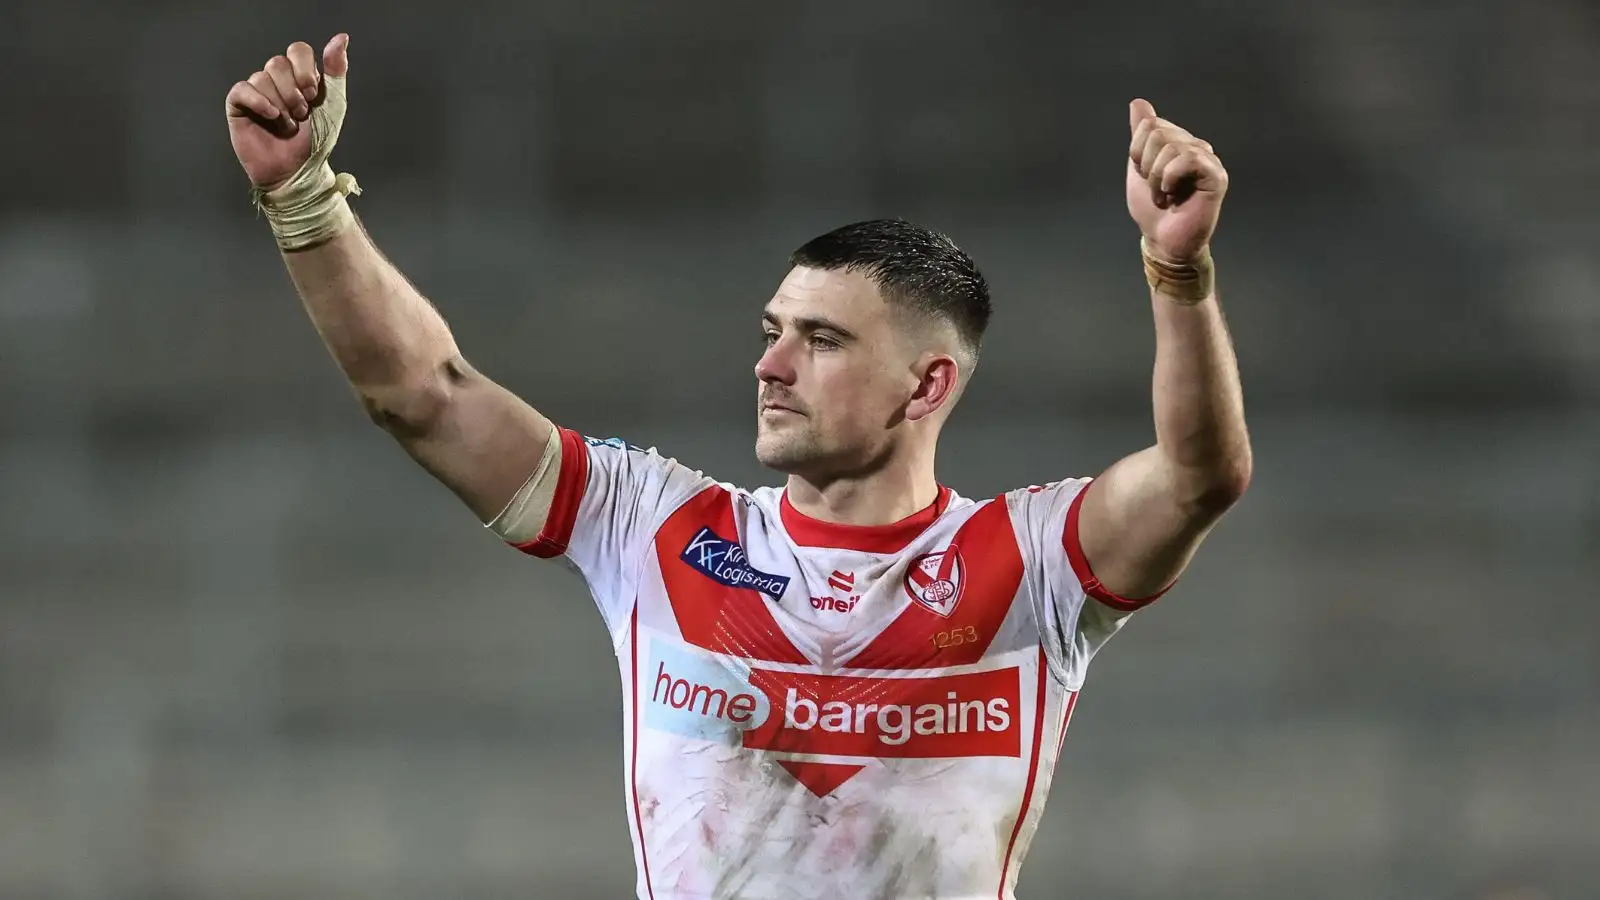 Rumour Mill: St Helens star agrees bumper deal to join NRL club in 2025